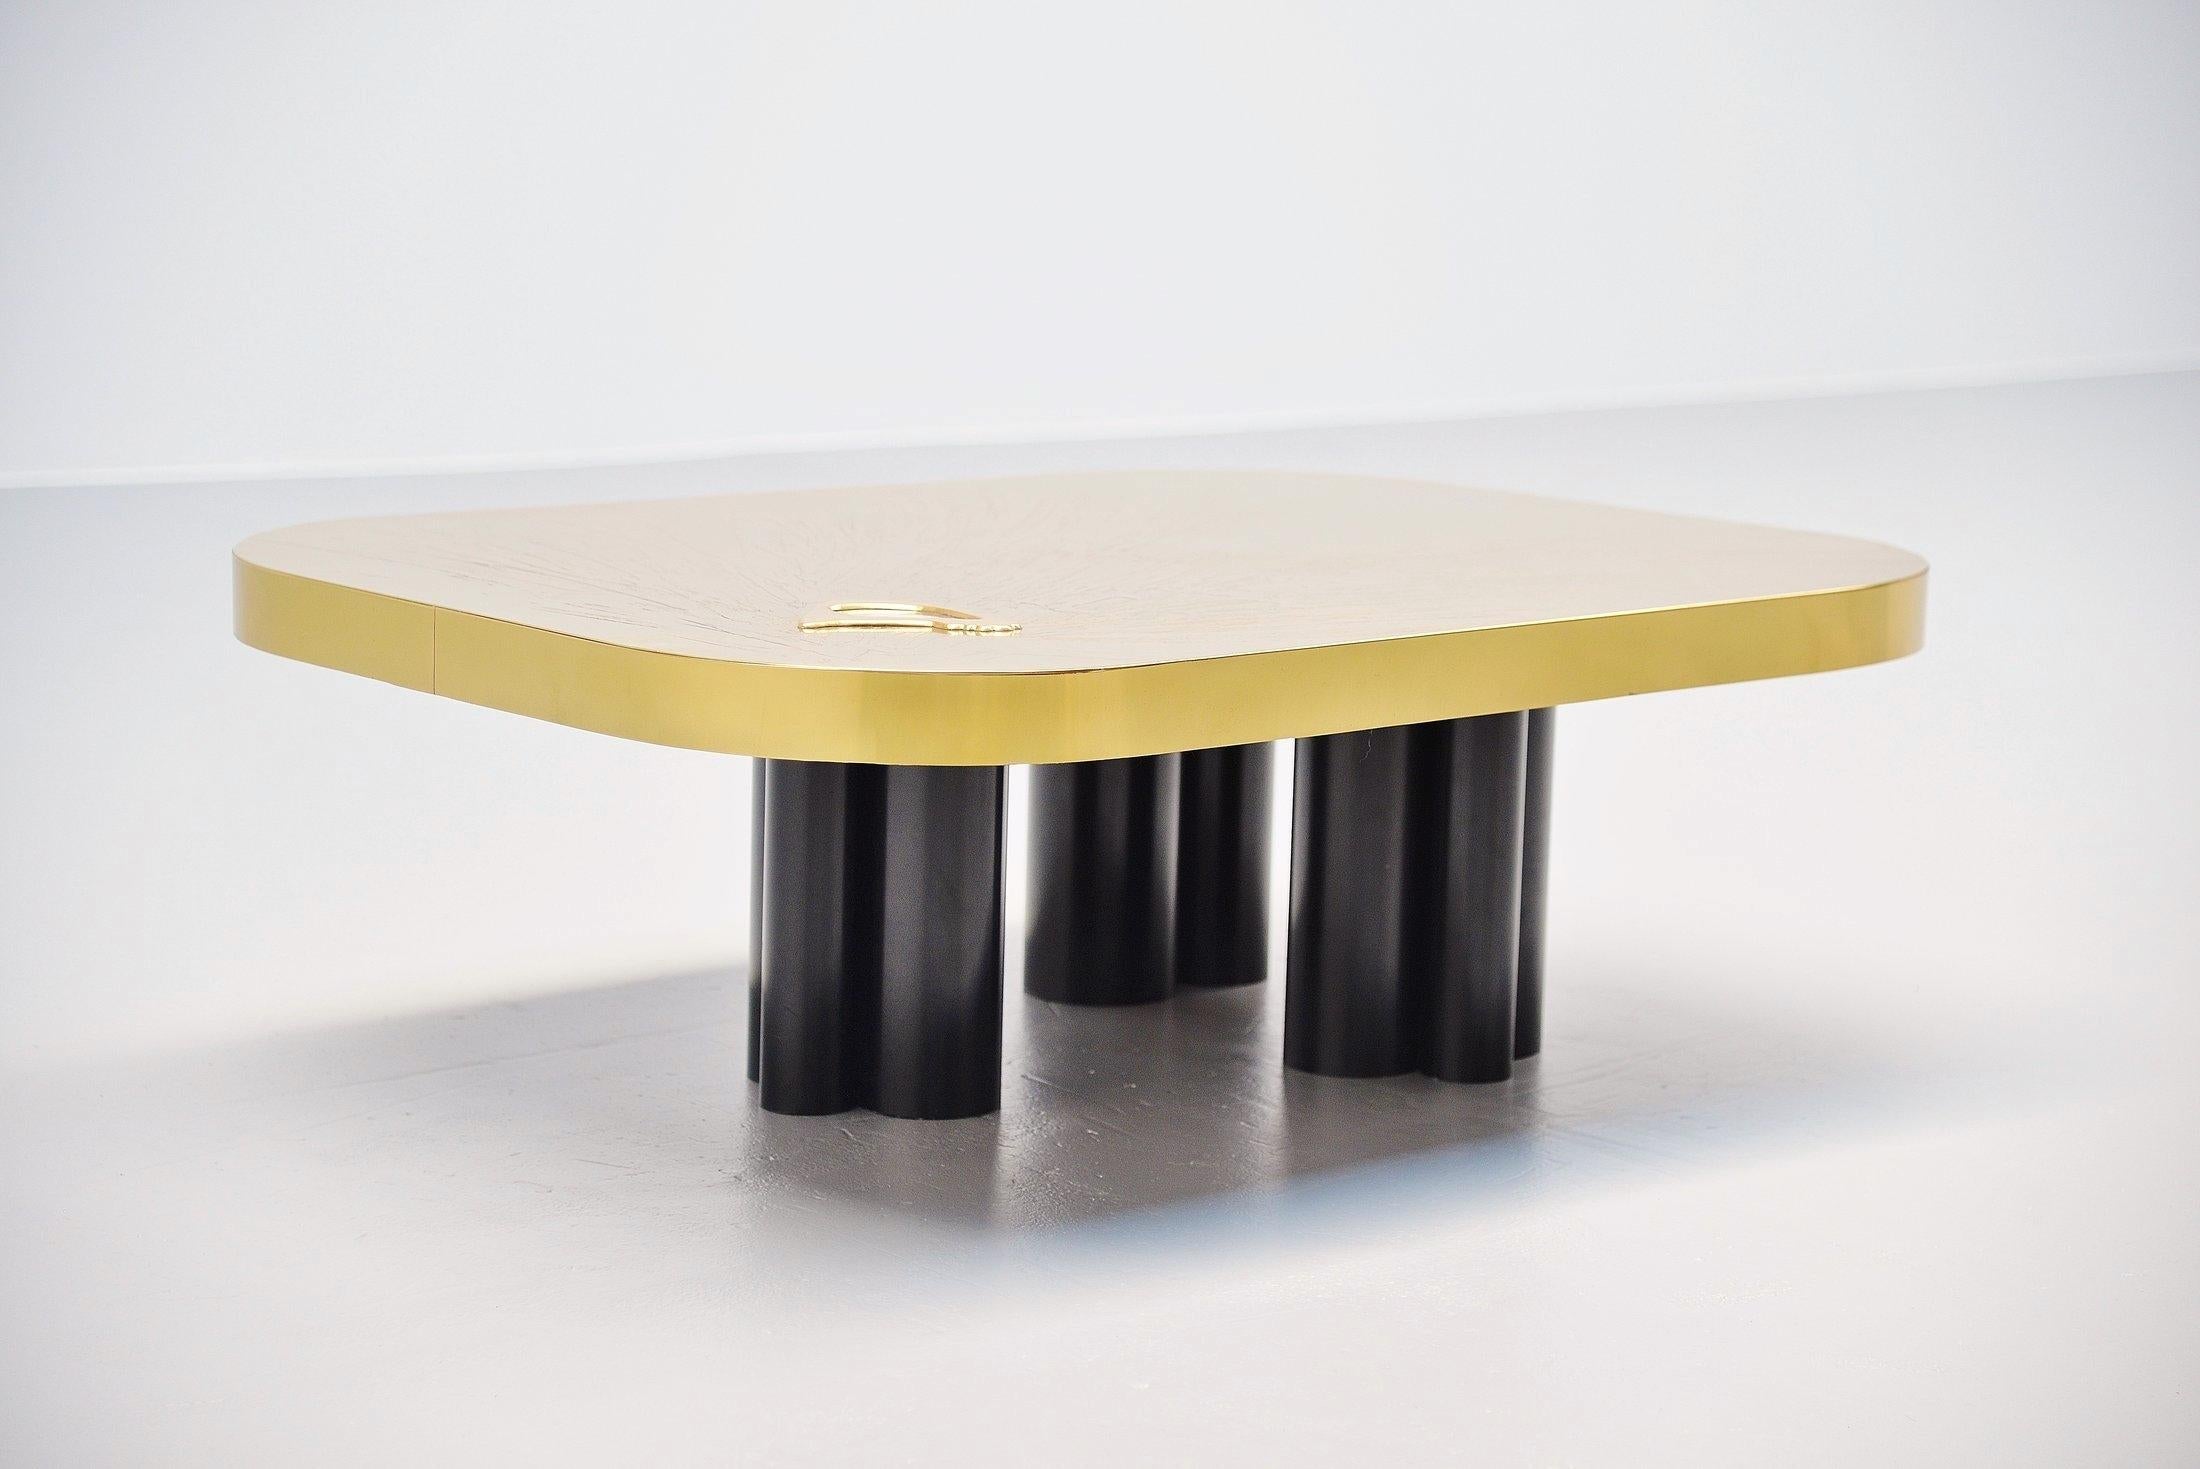 Very nice and decorative coffee table made by Albert Verneuil, Belgium, 1970. This coffee table is made of brass plated wood, hand etched and has a very nice agate in it. The table rests on heavy black metal legs, big tubes welded to each other.